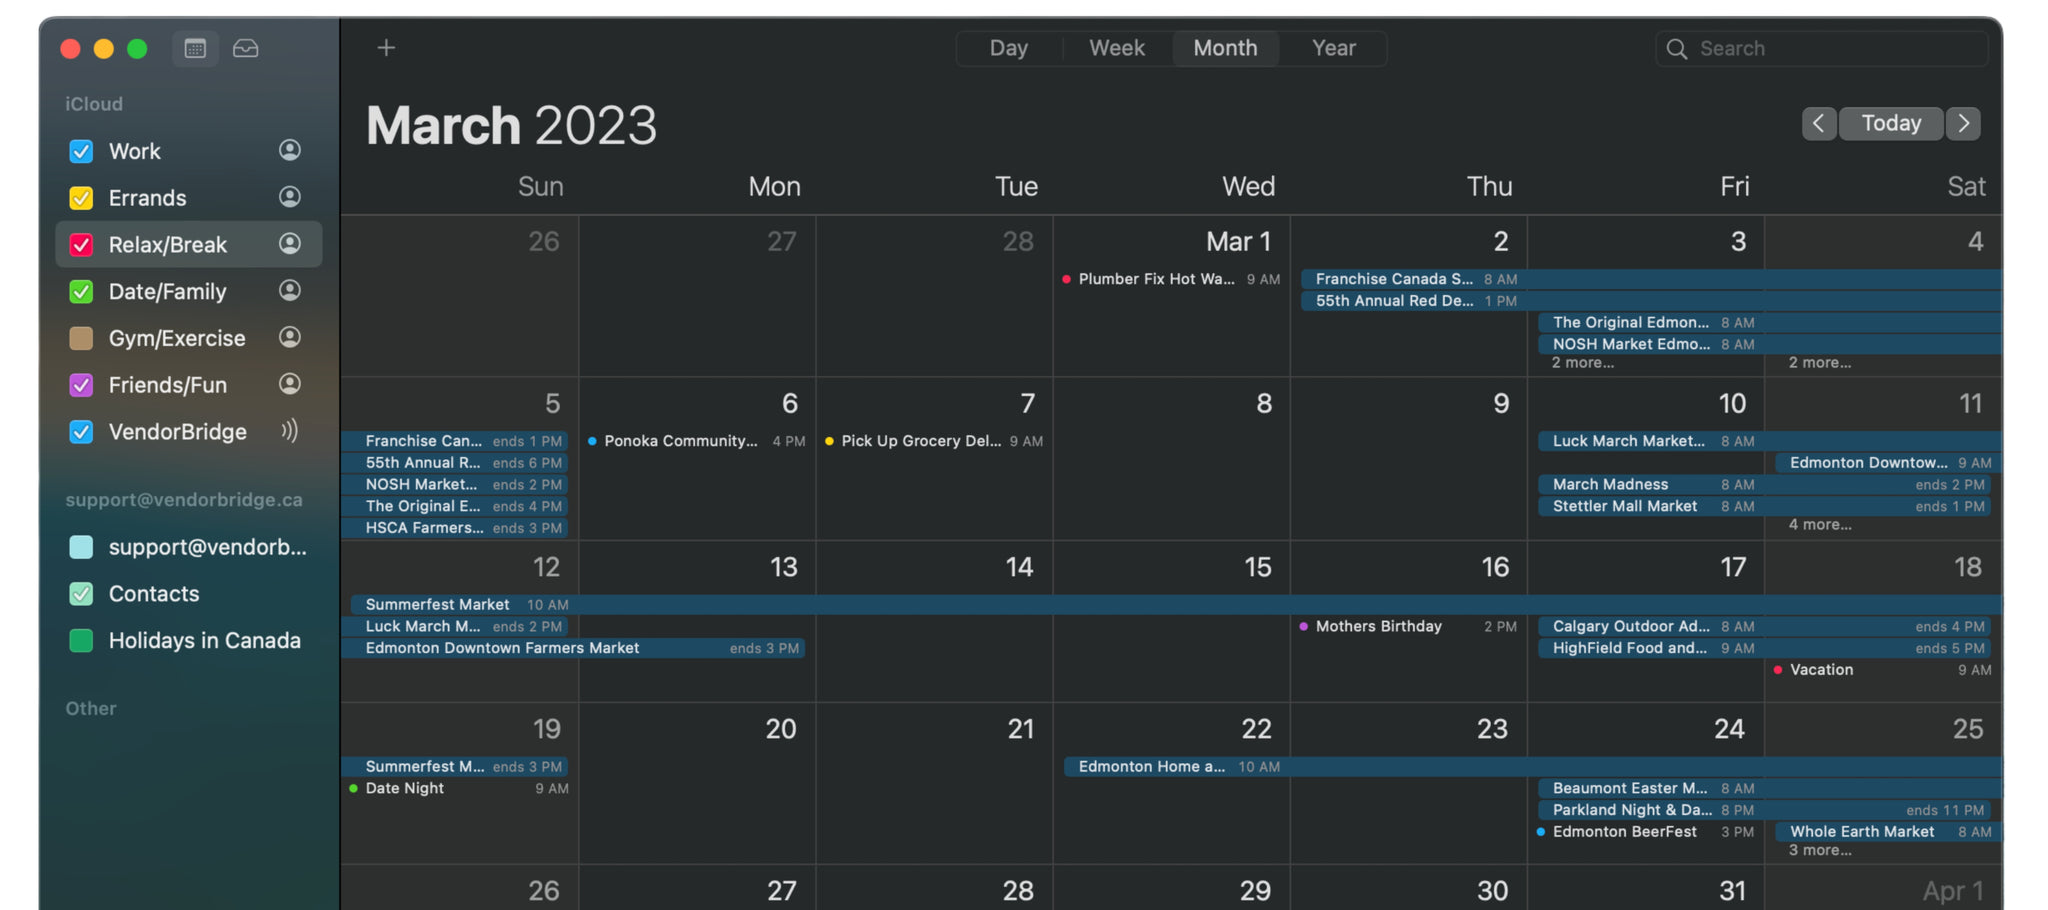 Our synced event calendar updates the local vendor business events directly in your calendar. 